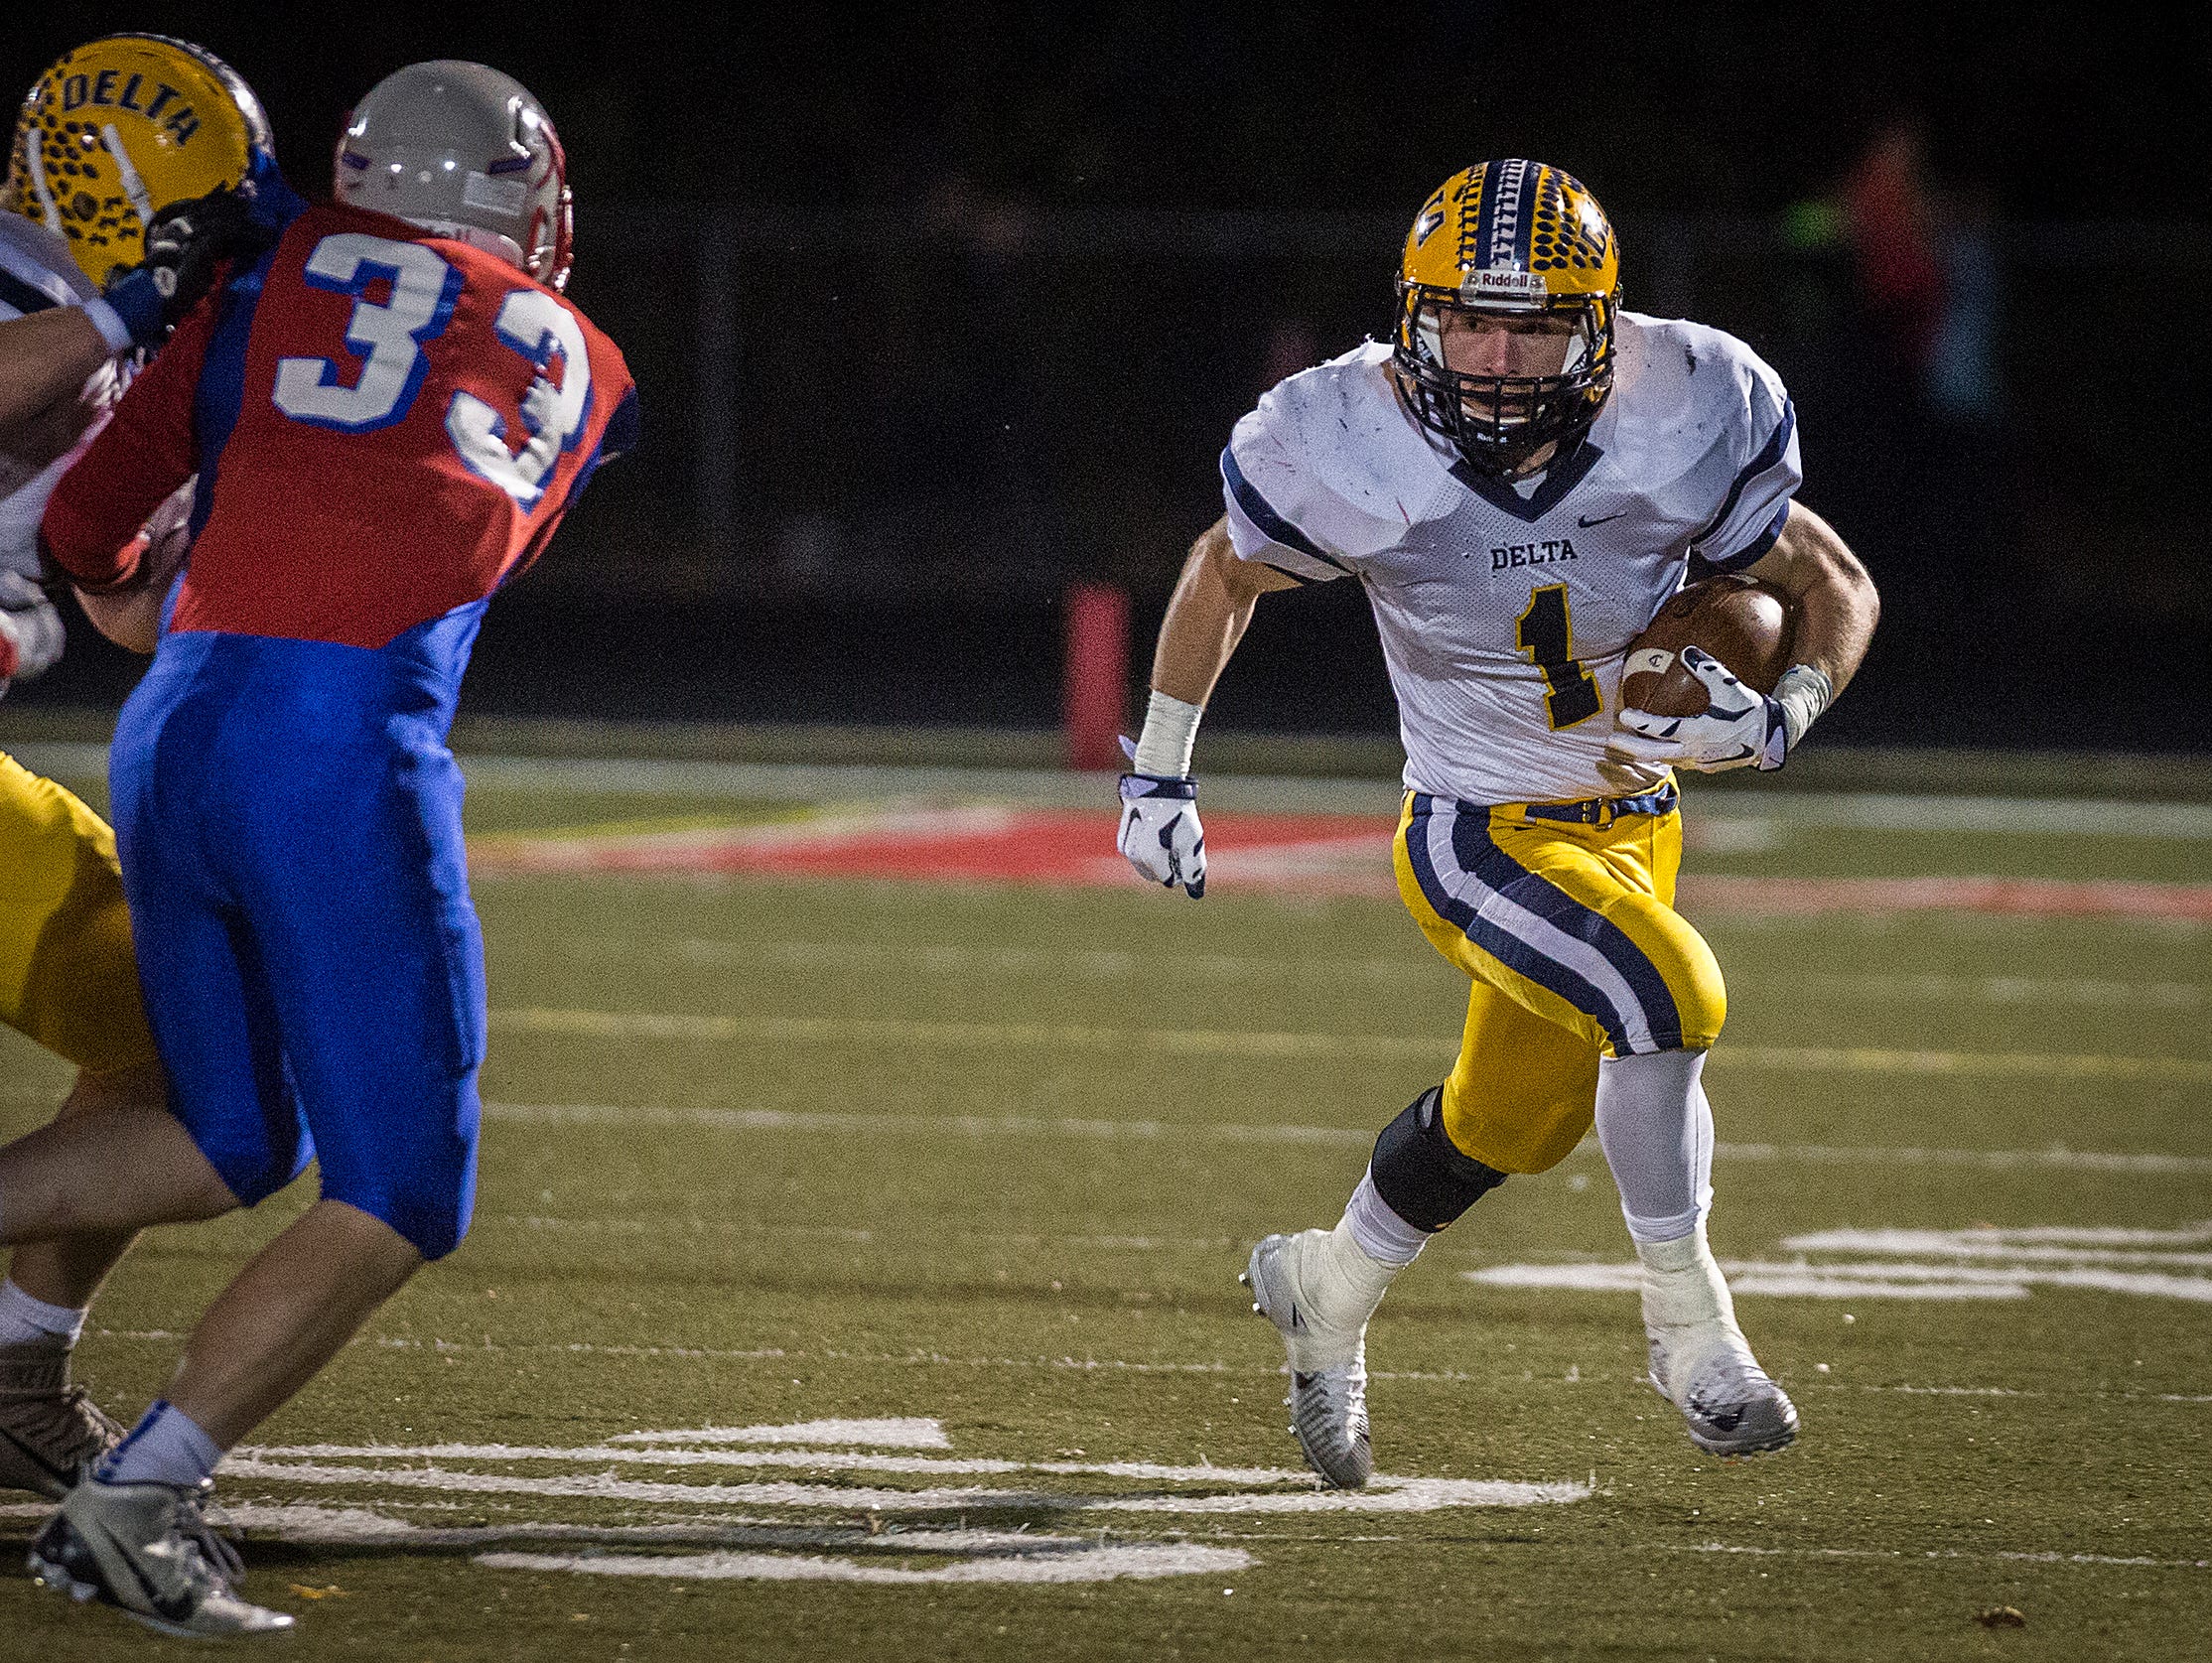 Delta's Zach Mills looks for an opening in Roncalli's defense during their regional game at Roncalli High School on Friday, Nov. 13, 2015.